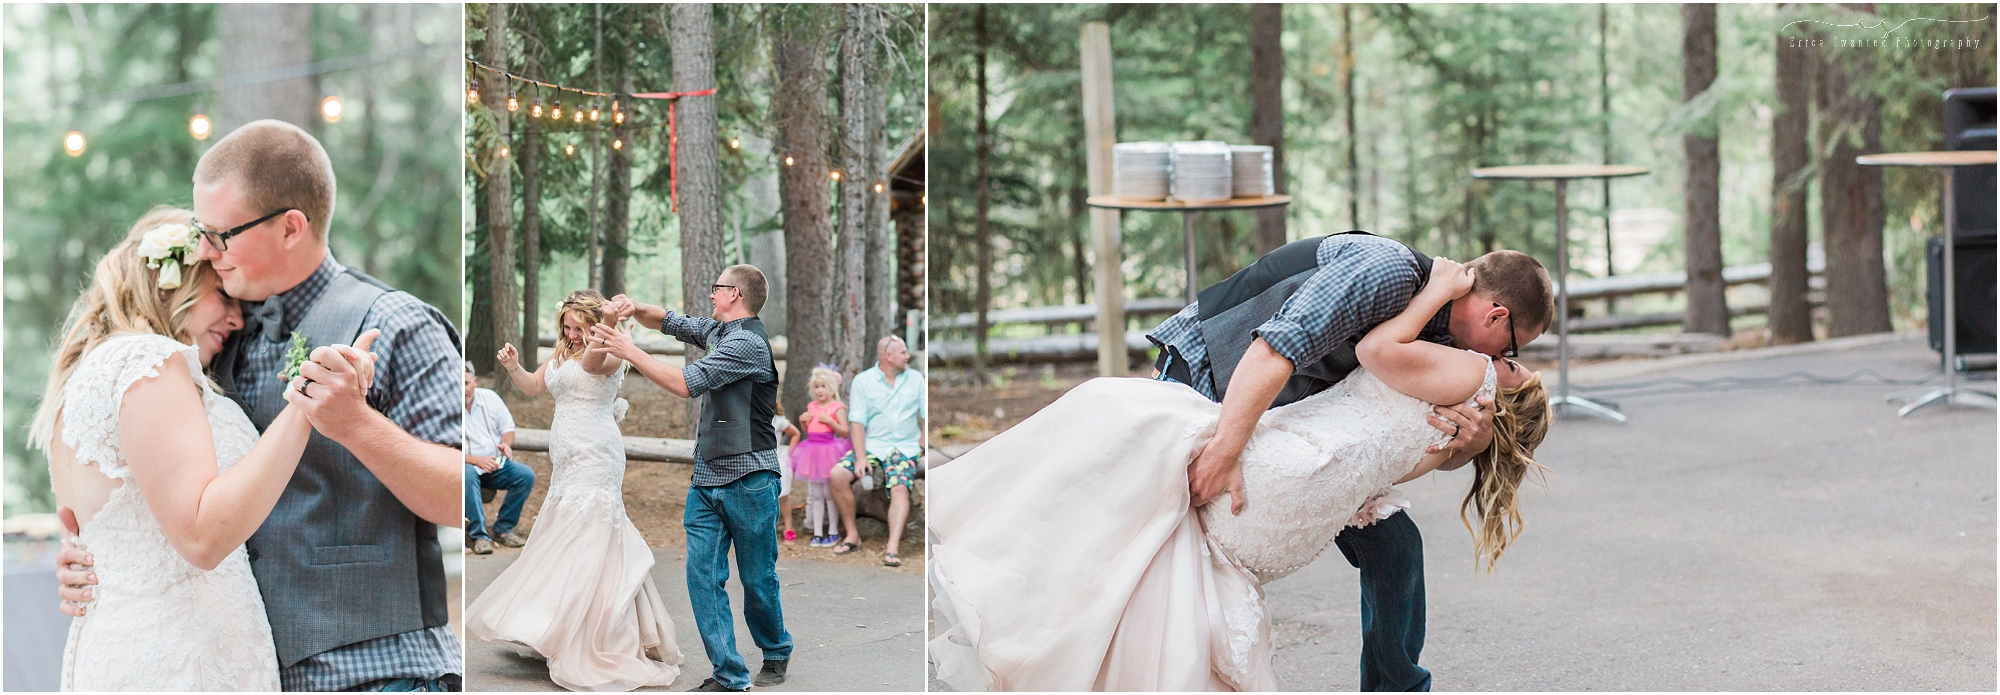 An outdoor wedding reception at Skyliner's Lodge in Bend, with dancing under the setting sun. 